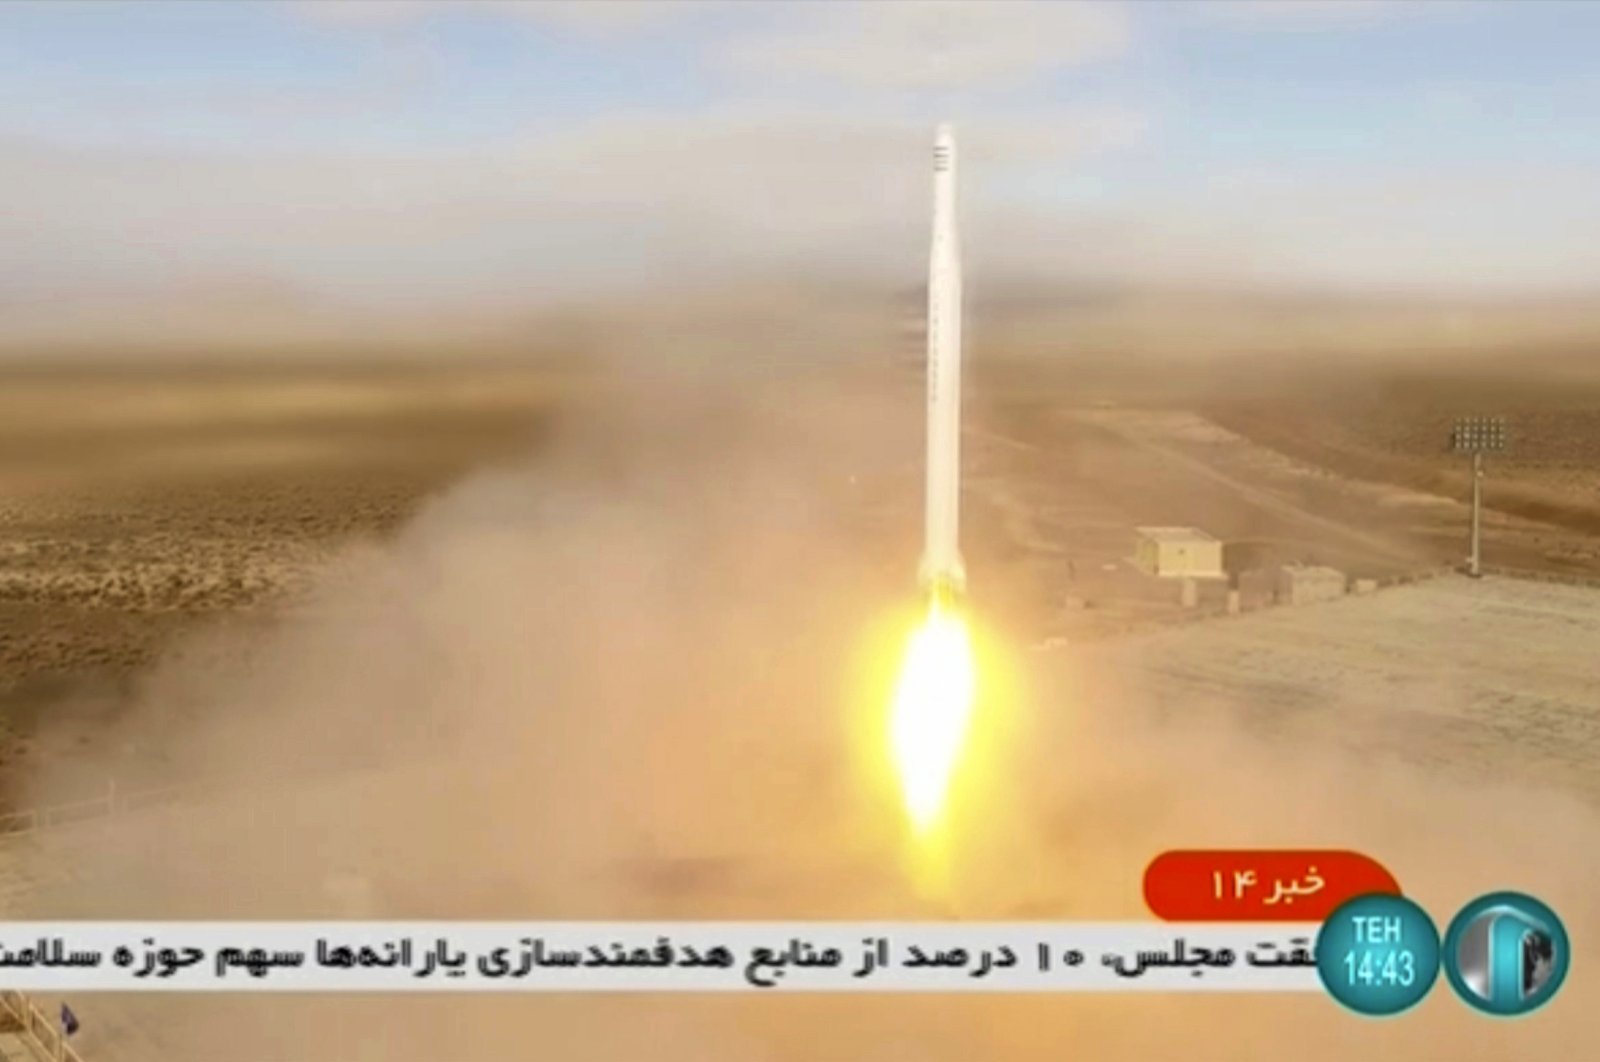 The launch of a rocket by Iran's Revolutionary Guard carrying a Noor-2 satellite is seen in the Shahroud Desert in Iran in this image taken from video footage aired by Iranian state television on March 8, 2022. (Iranian state television via AP)